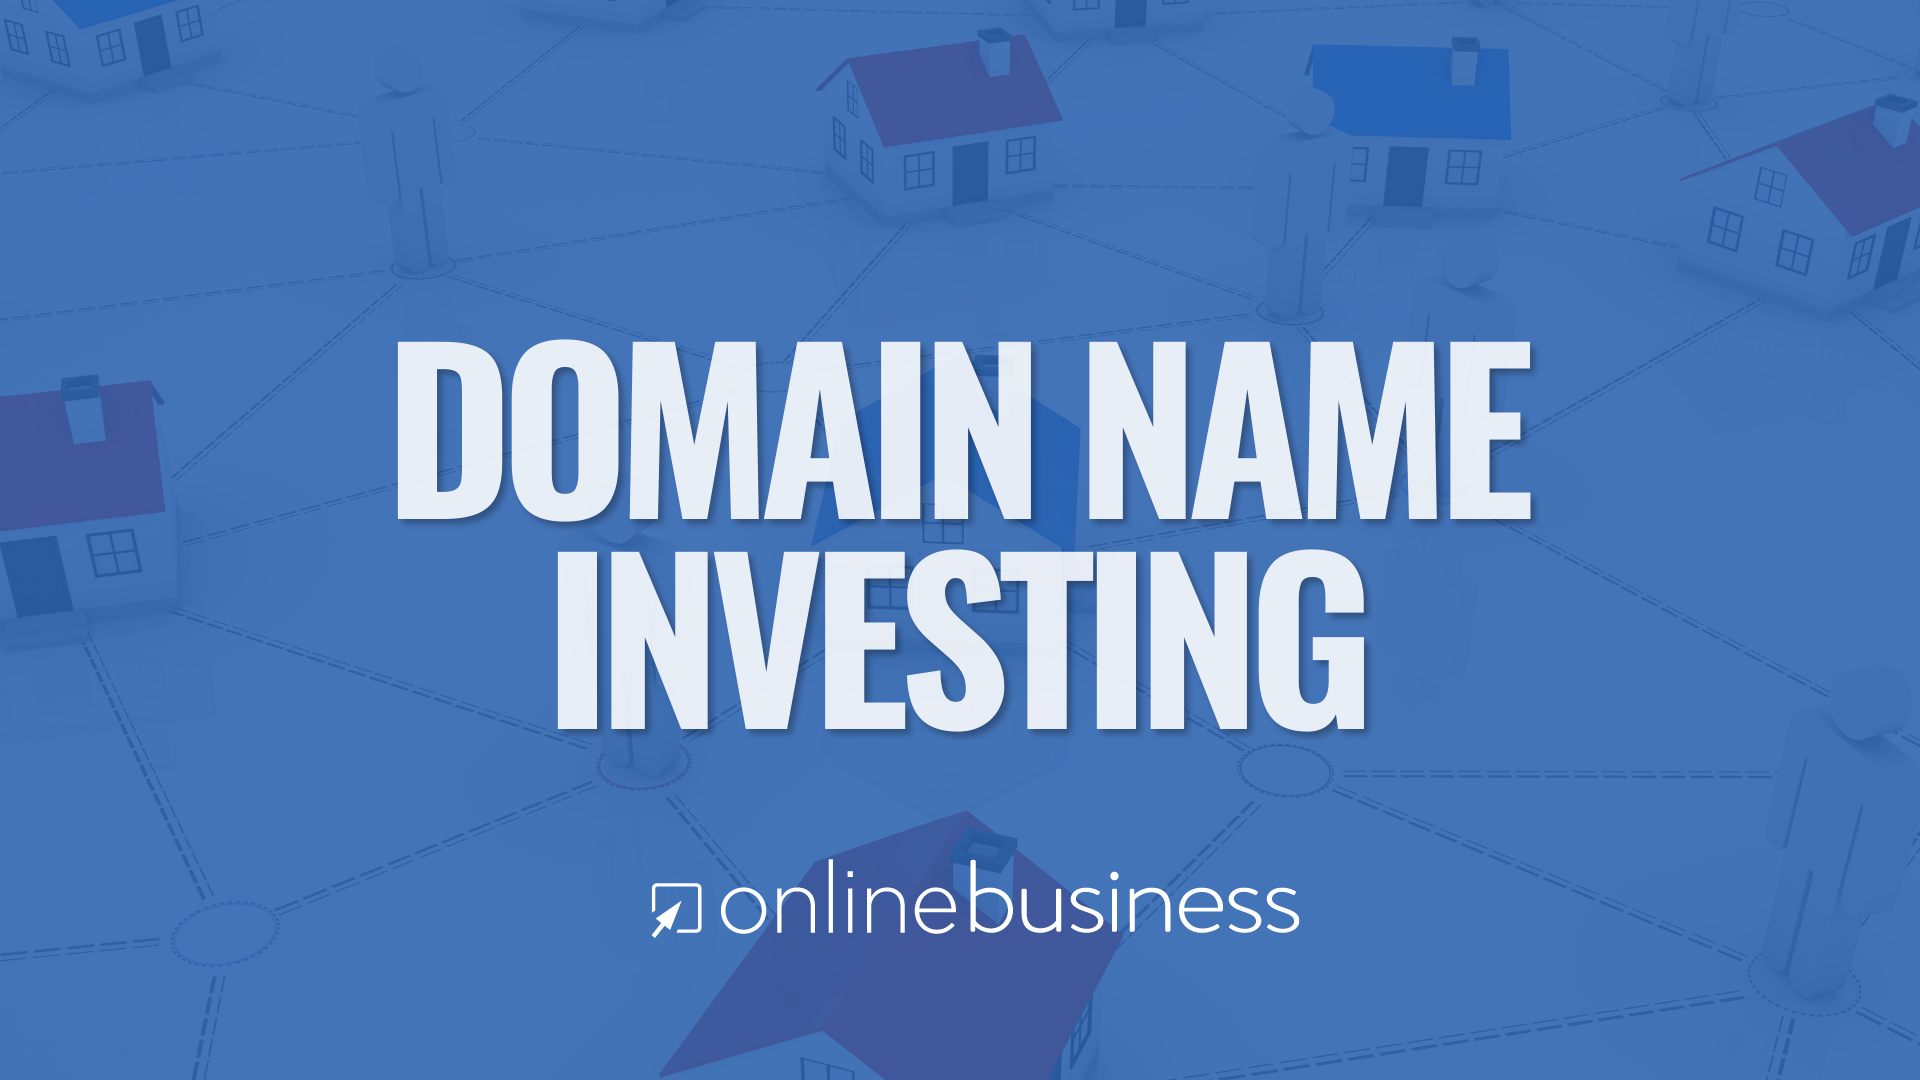 OnlineBusiness.com Says the #1 Rule in Real Estate Applies to Domain Names